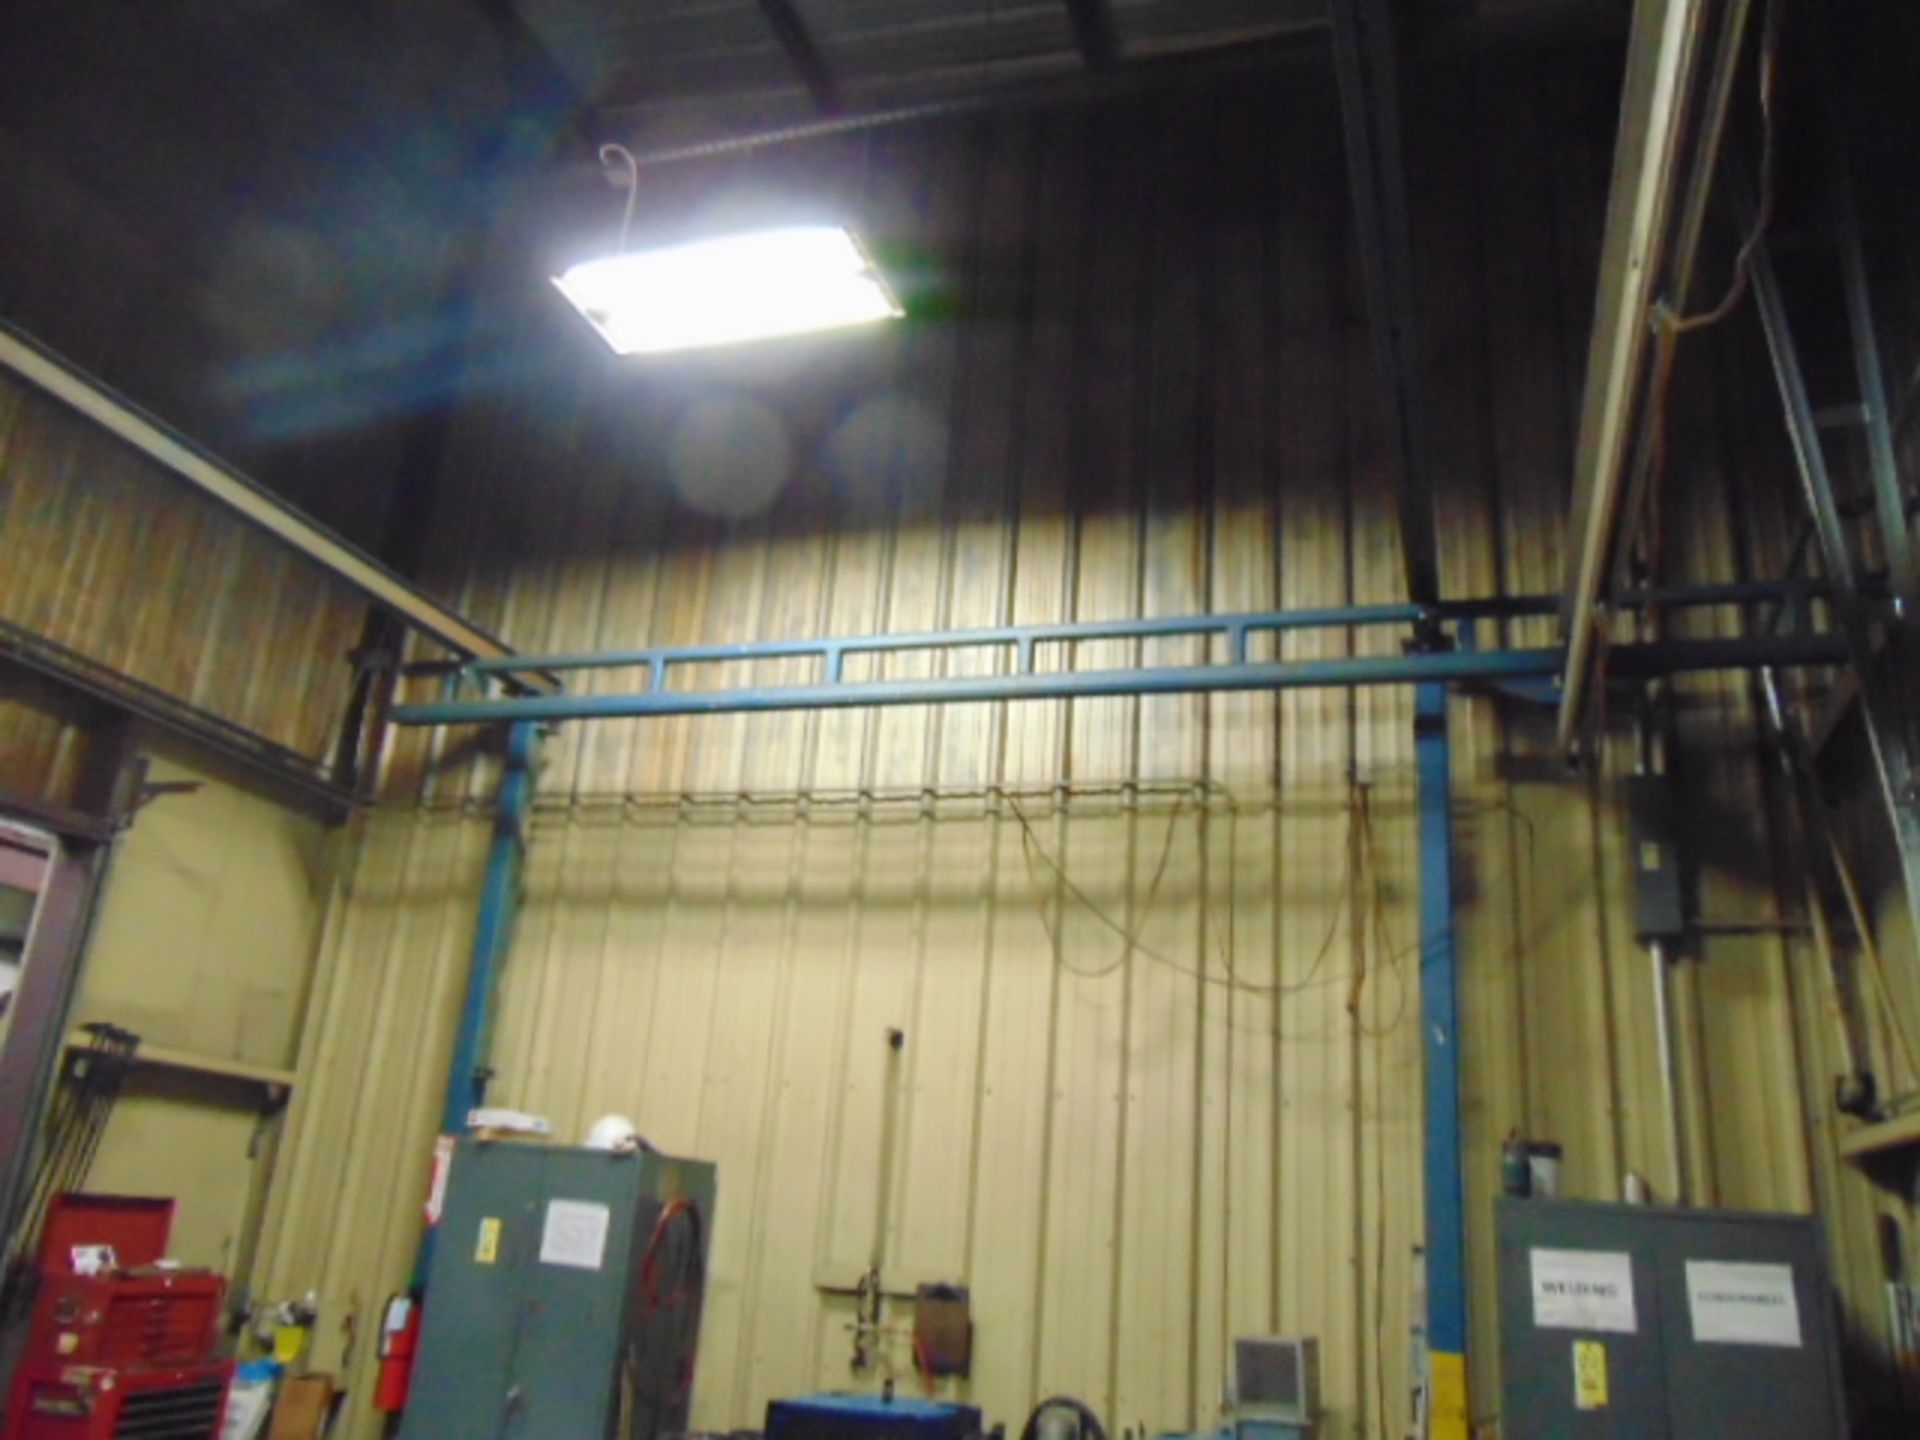 FREE STANDING GANTRY CRANE SYSTEM, GORBEL 2,000 LB. CAP., approx. 20'W. x 20'L., approx. 10' under - Image 7 of 9